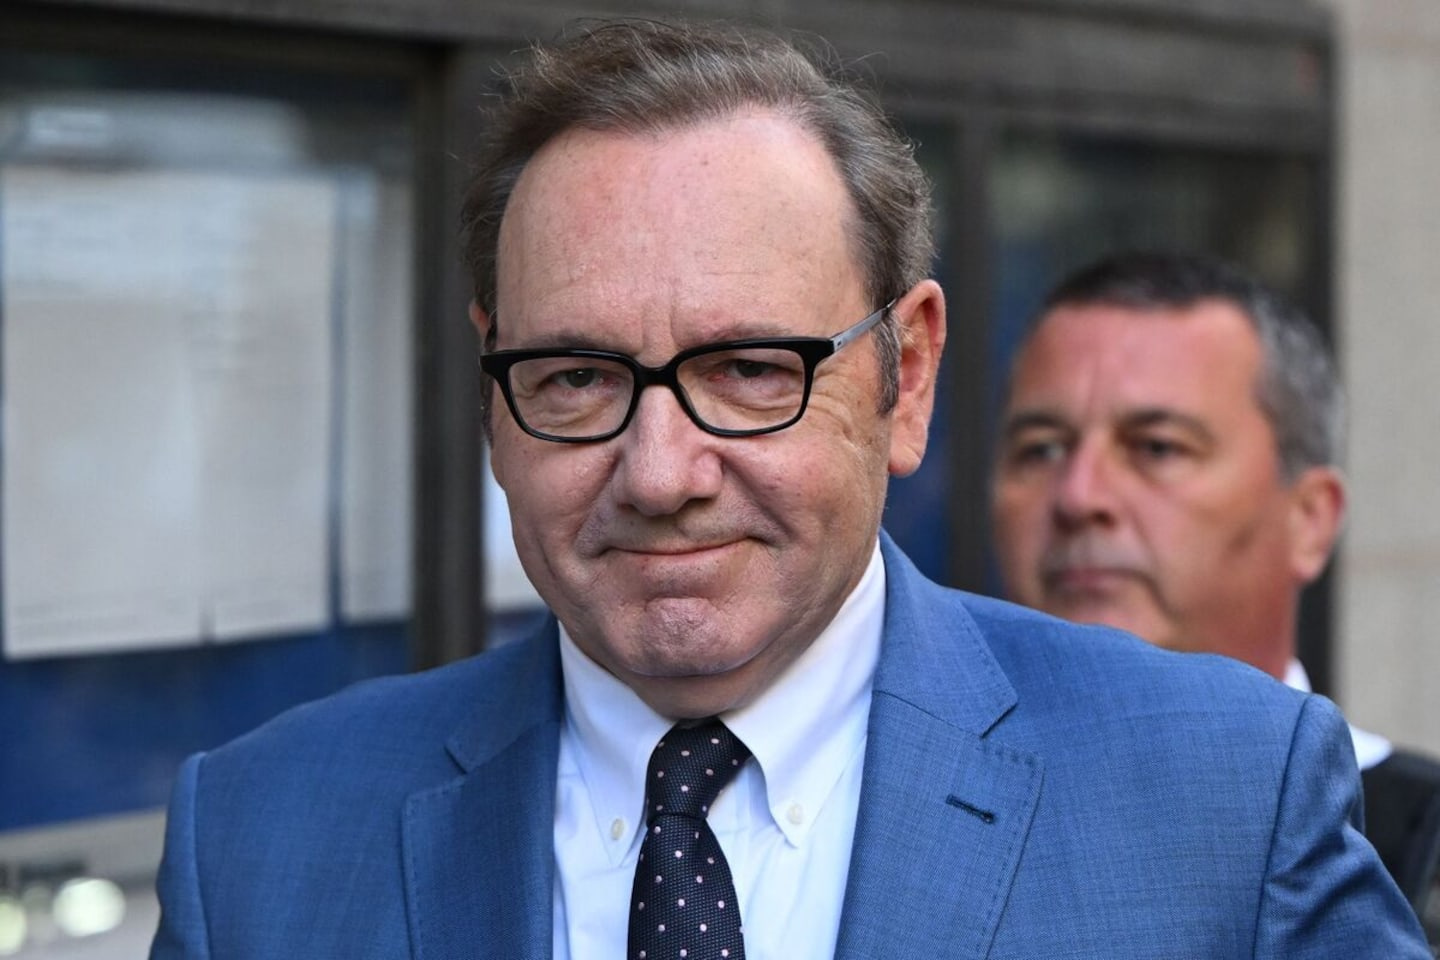 Accused of sexual assault, Kevin Spacey pleads not guilty in London